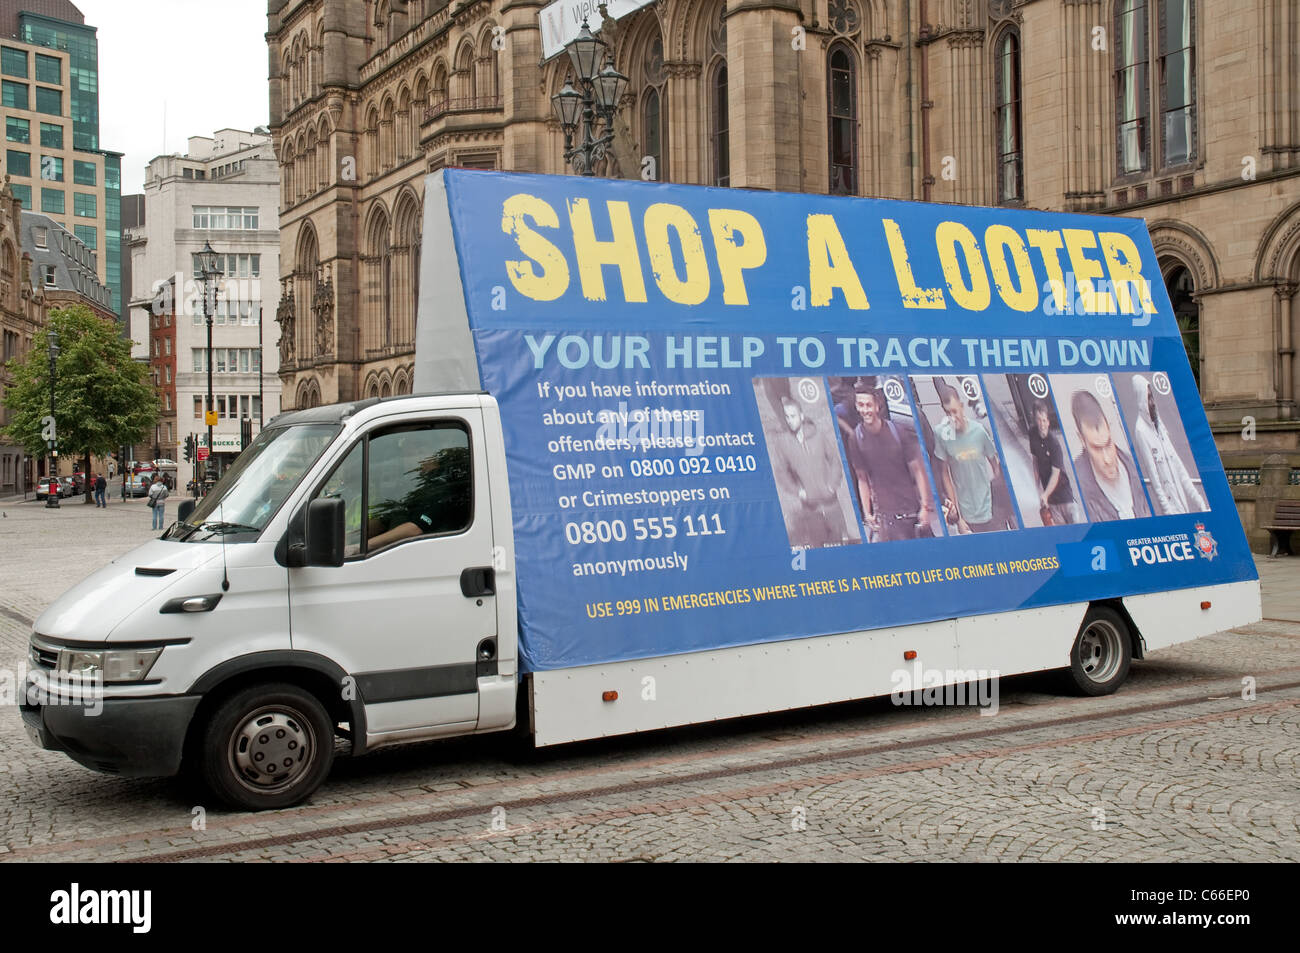 The aftermath of the August 2011 riots.Shop a Looter campaign vehicle parked in front of Manchester Town Hall,Albert Square. Stock Photo